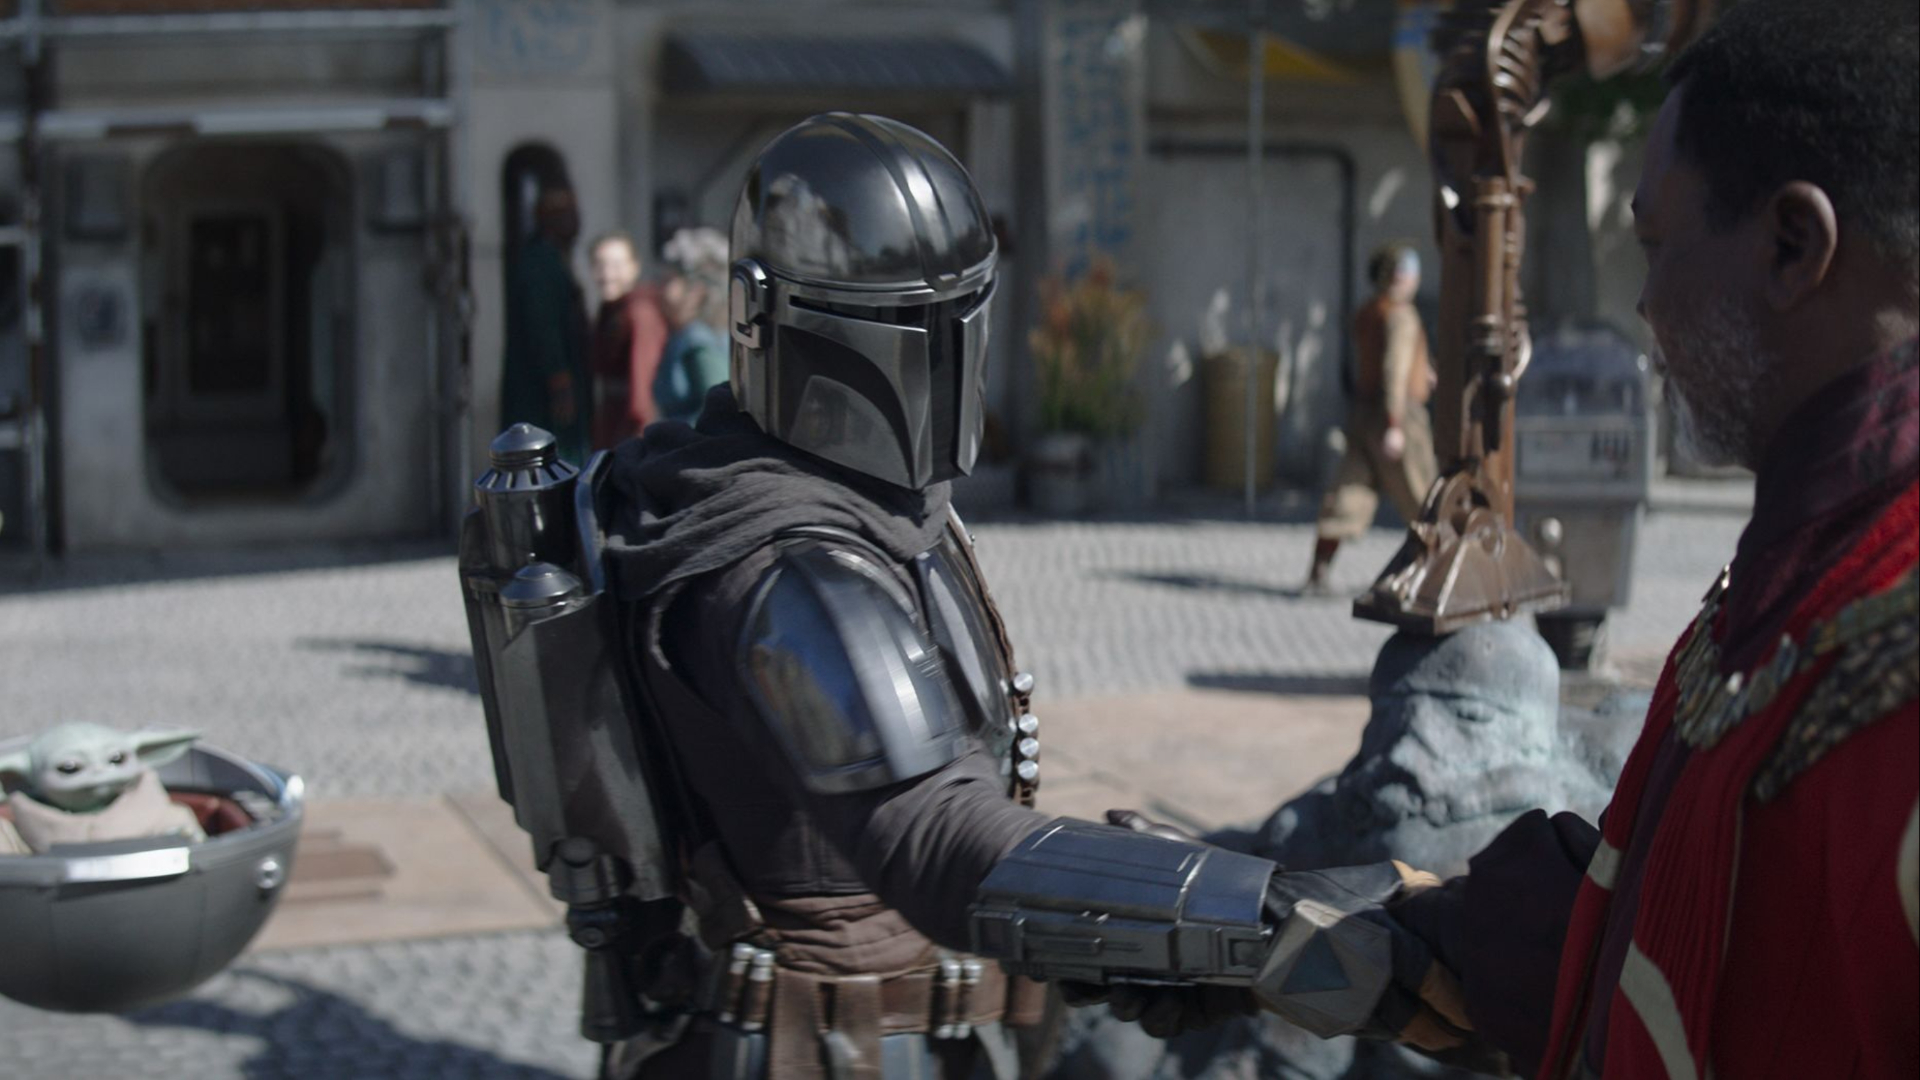 Disney Gallery: The Mandalorian season 3 release date and first look  revealed